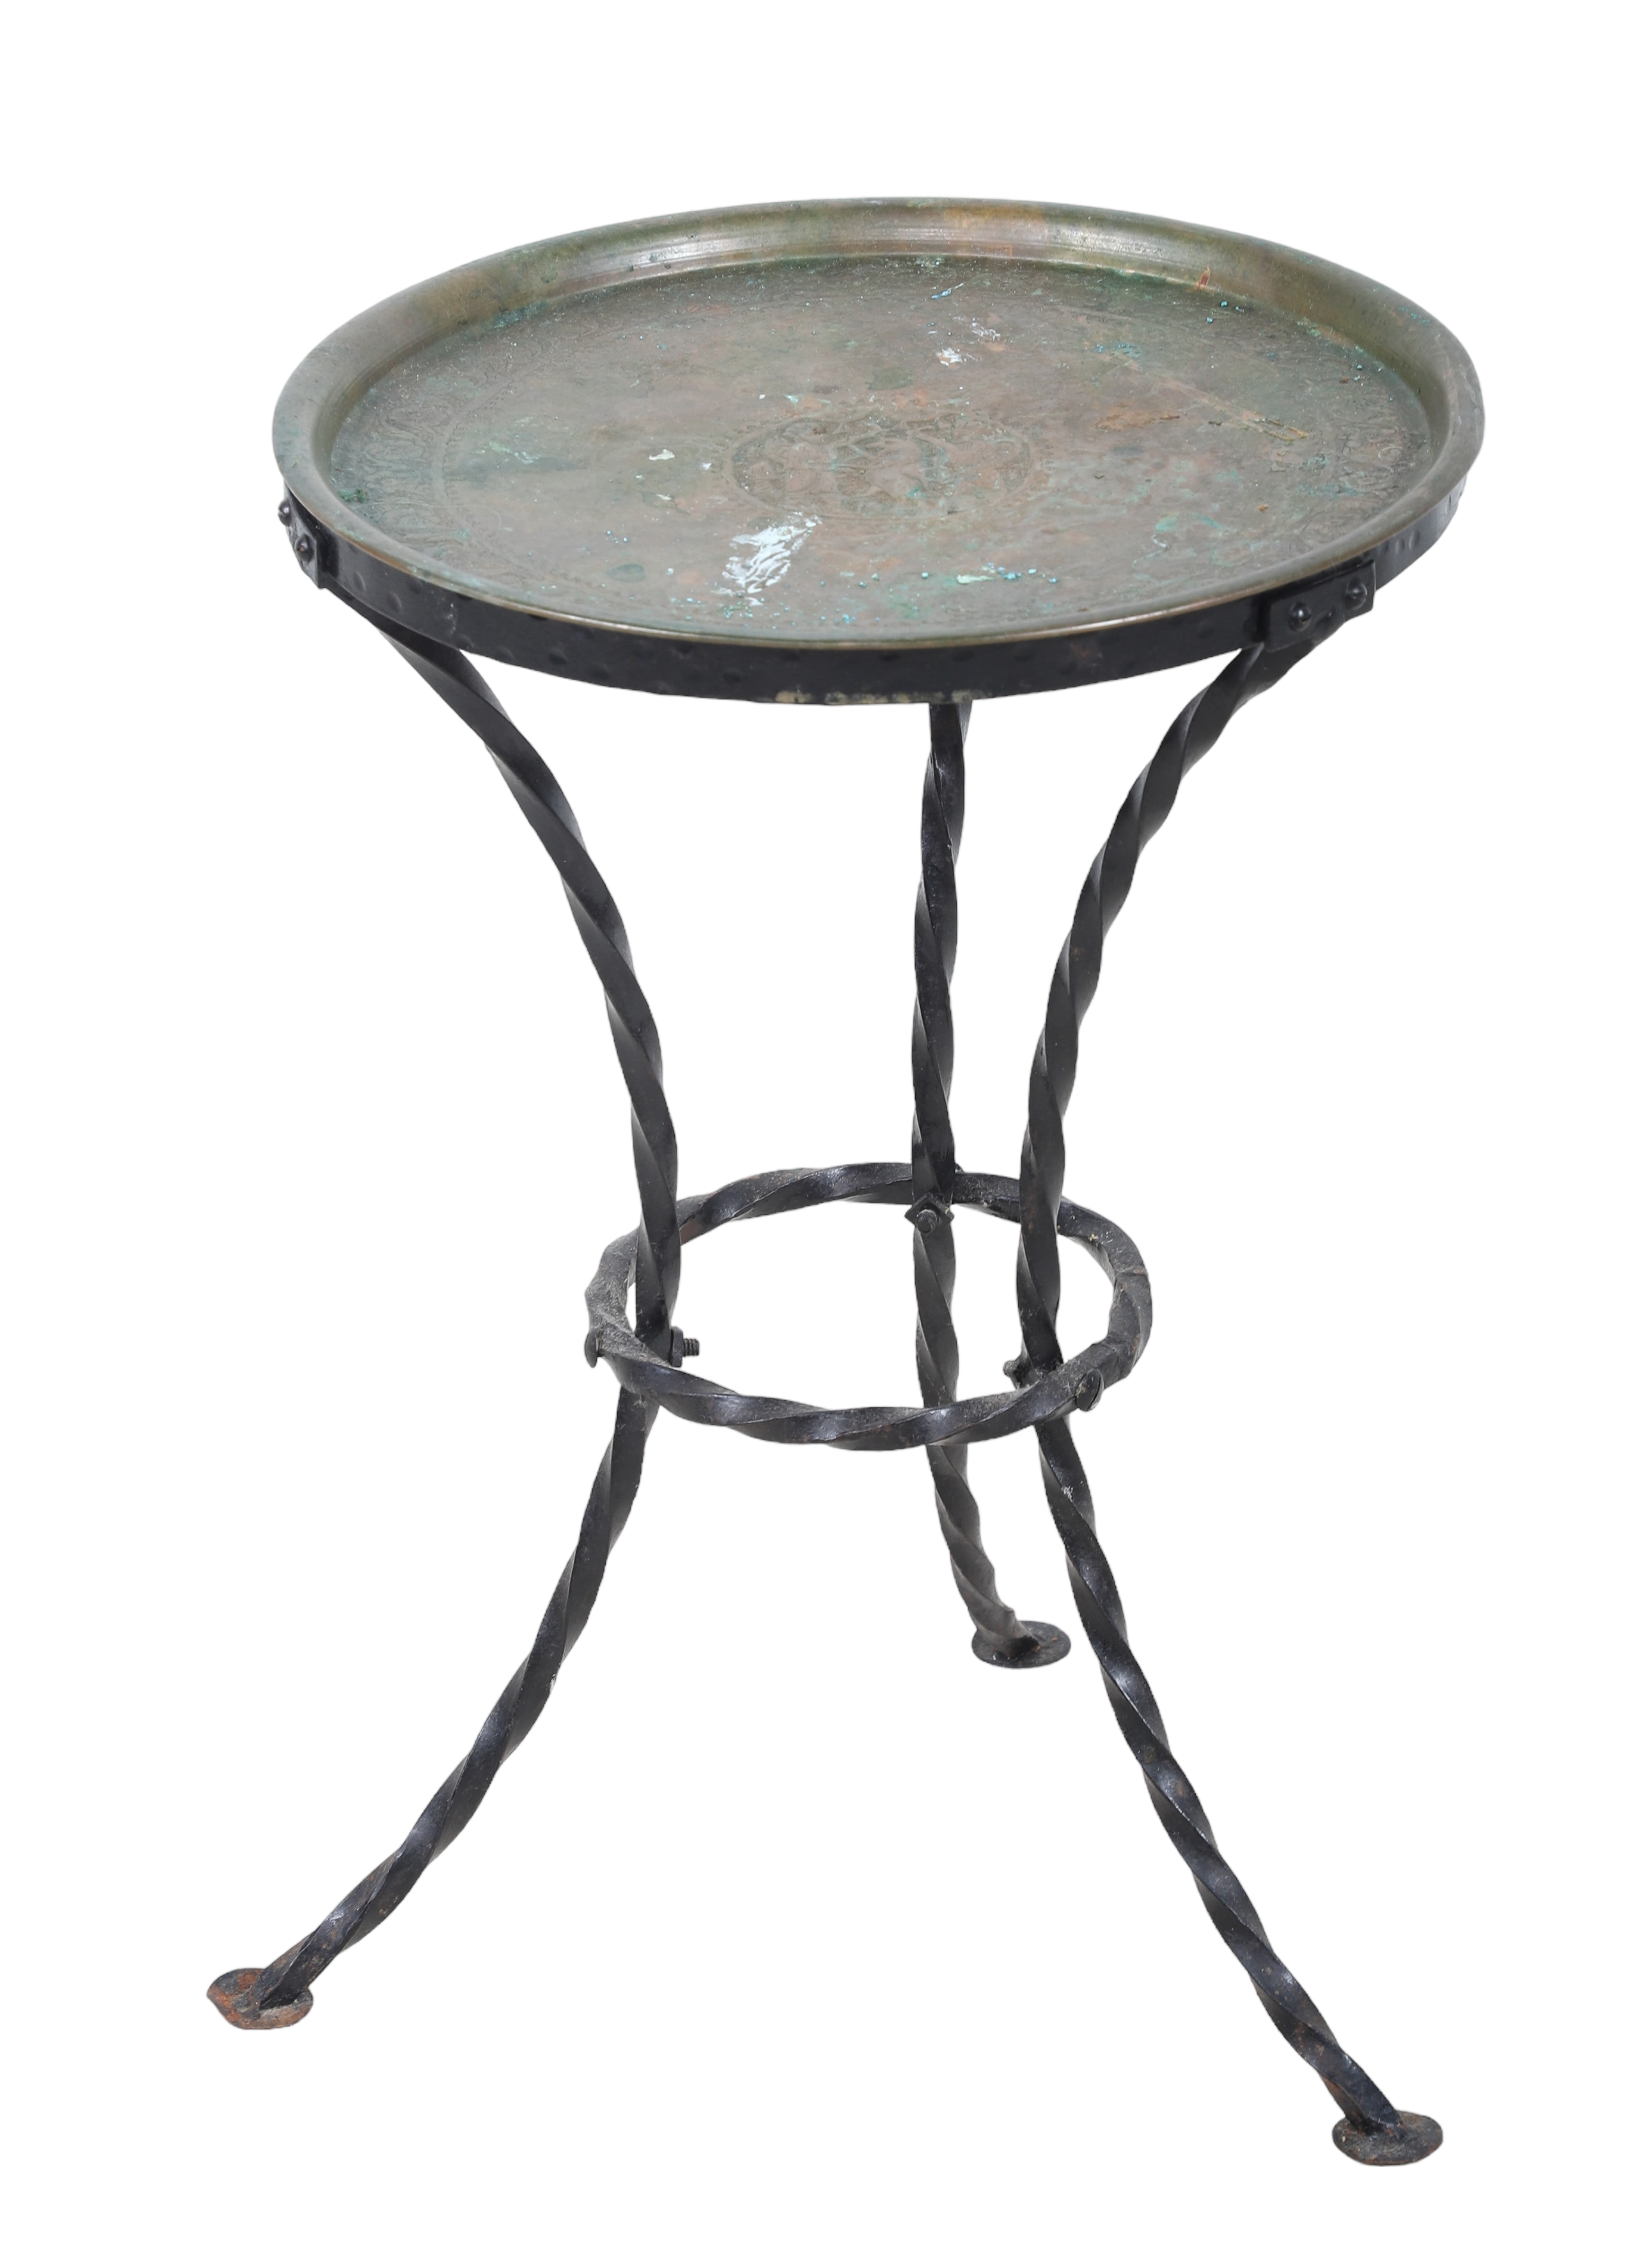 Iron and brass plant stand, embossed